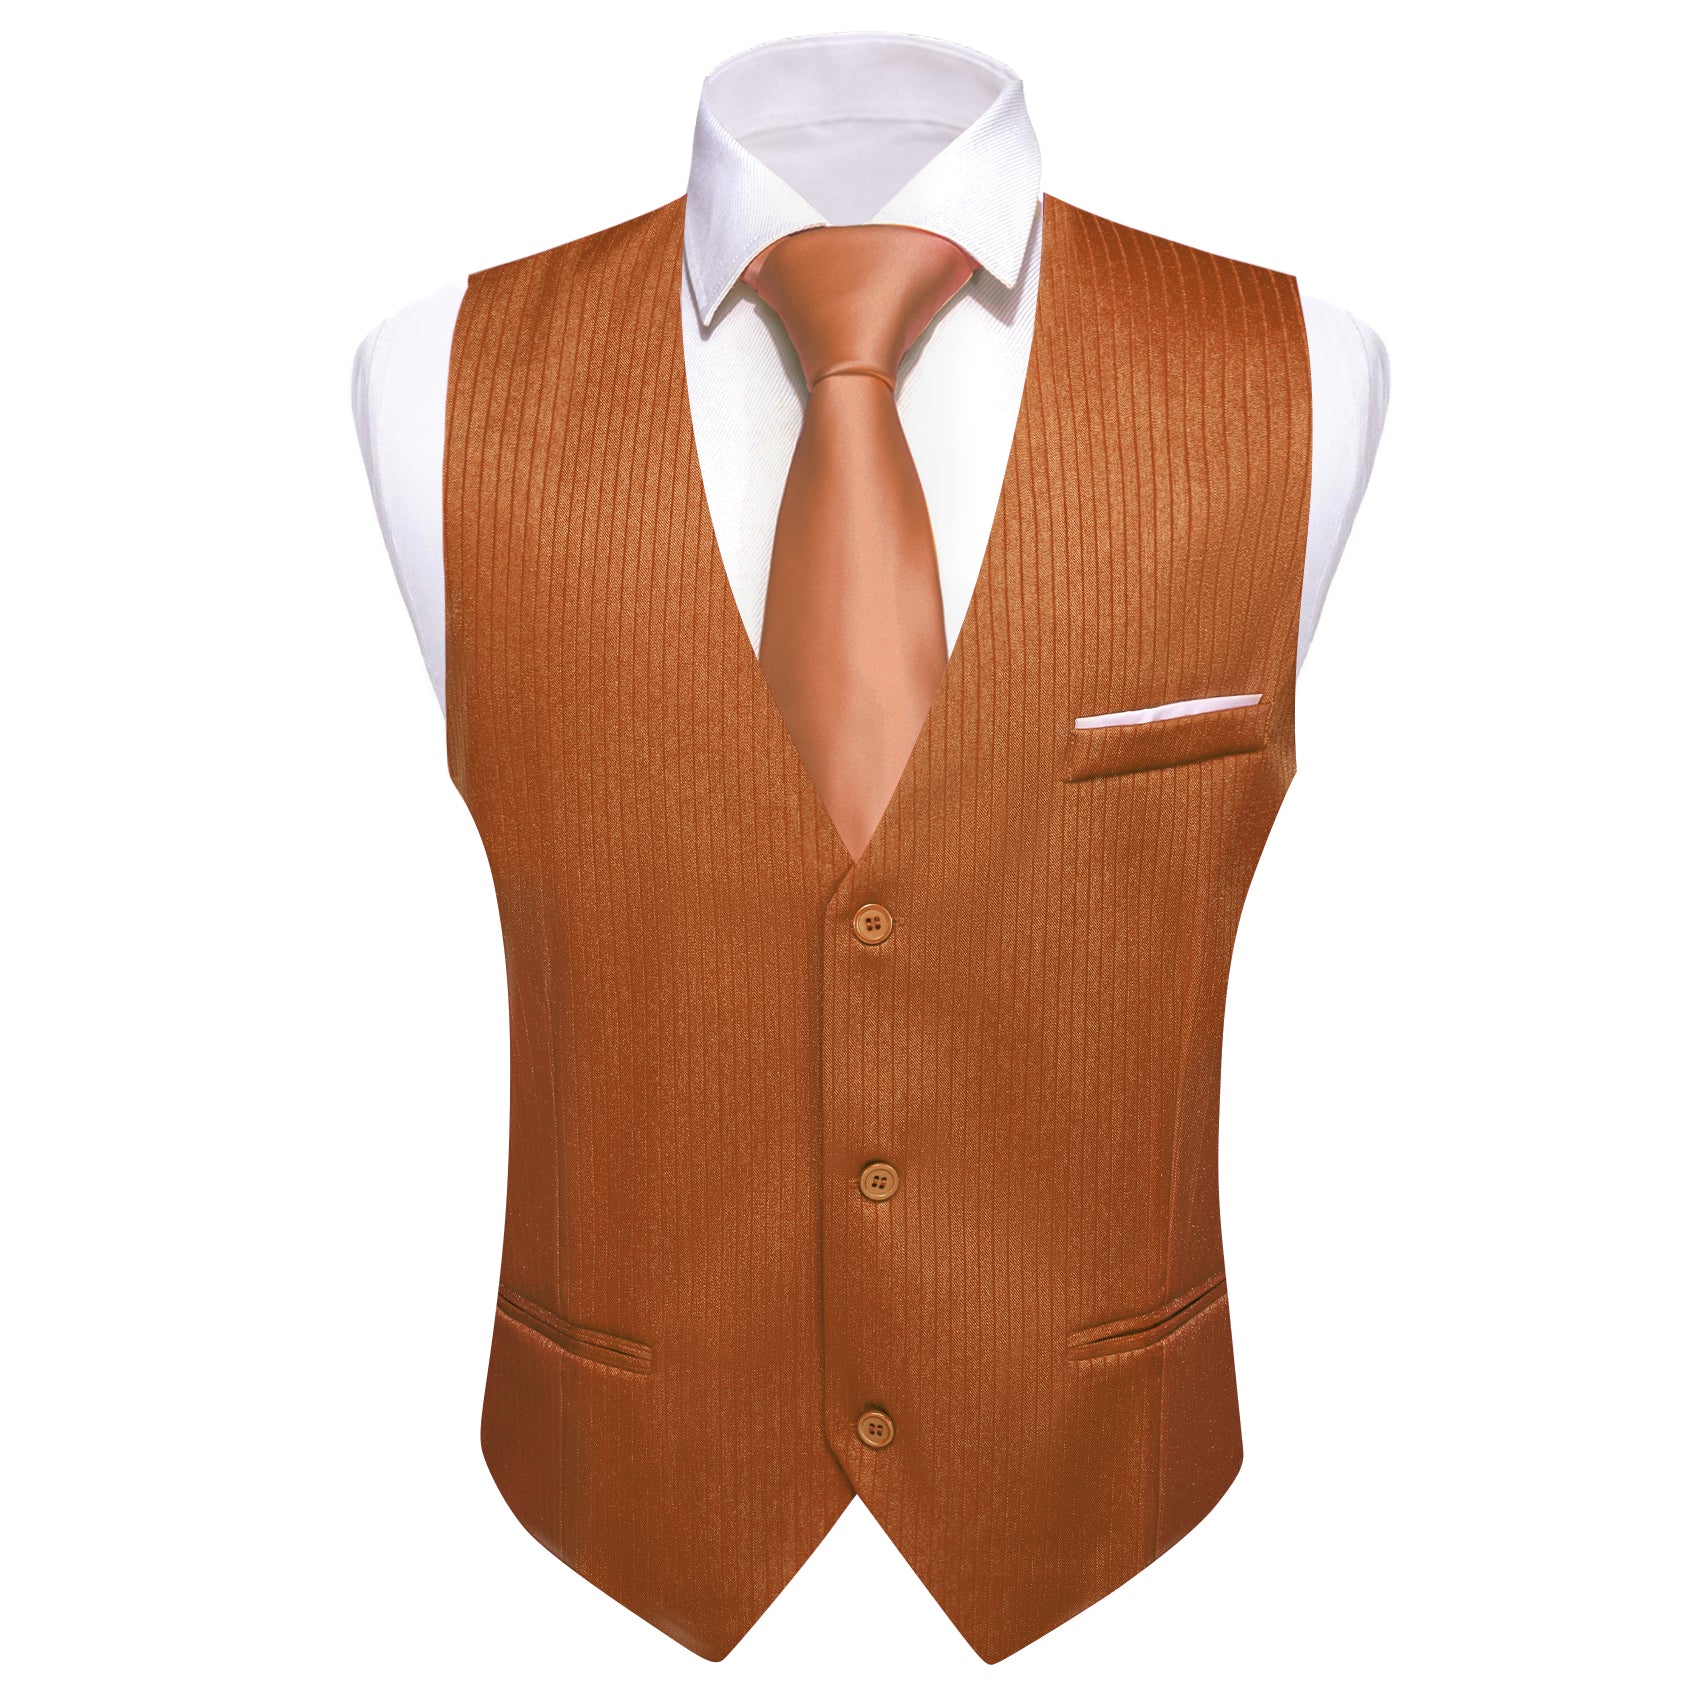 Barry.wang Chocolate Solid Business Vest Suit